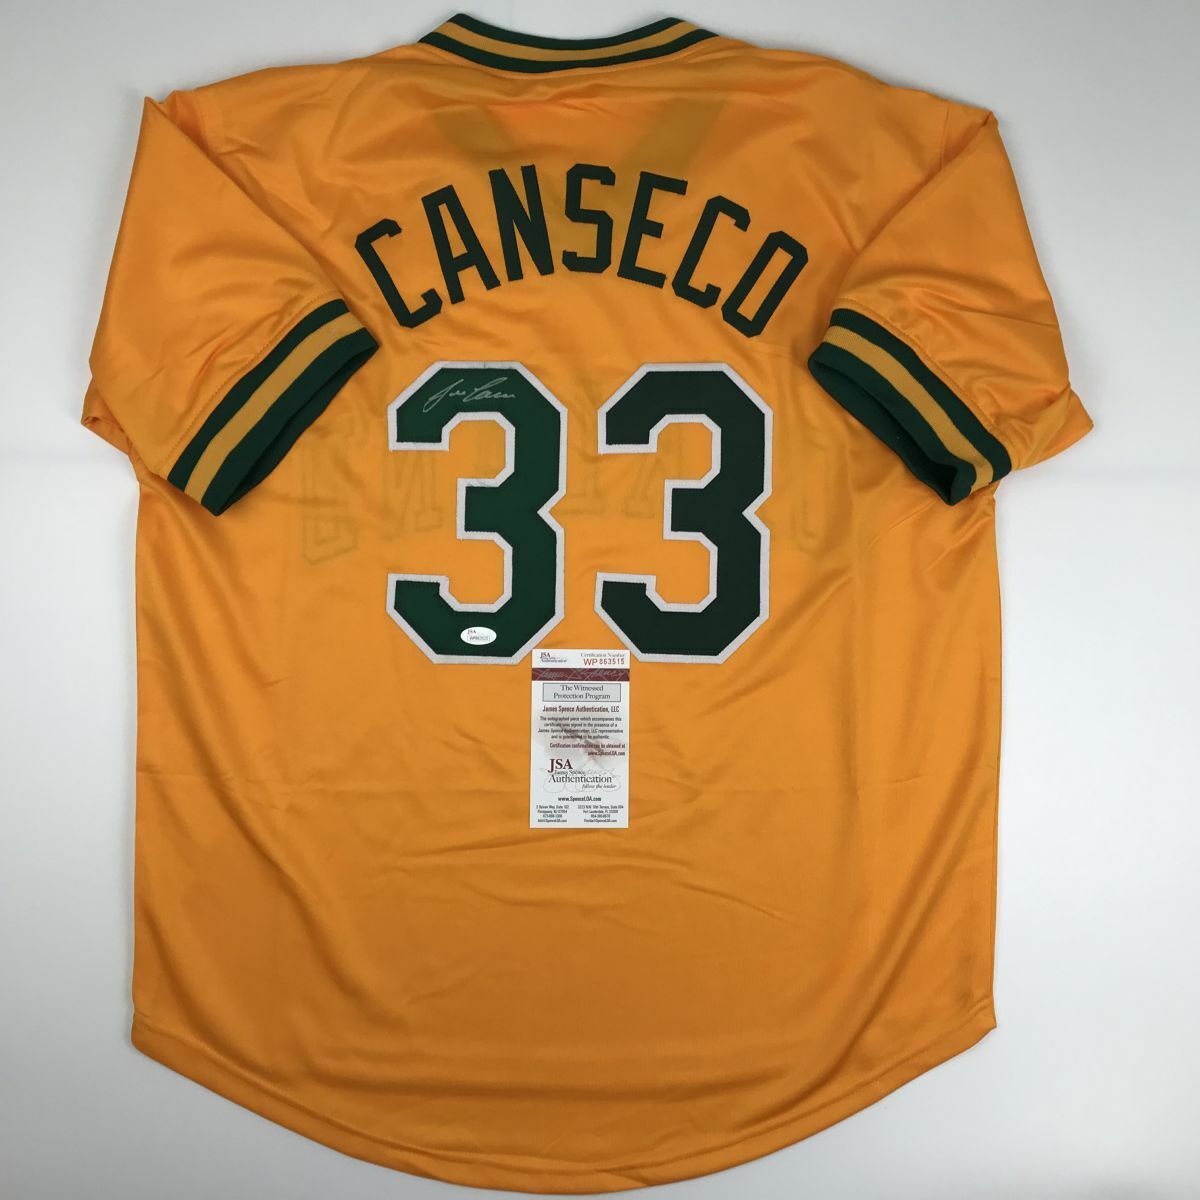 Jose Canseco signed jersey JSA Oakland Athletics Autographed at 's  Sports Collectibles Store